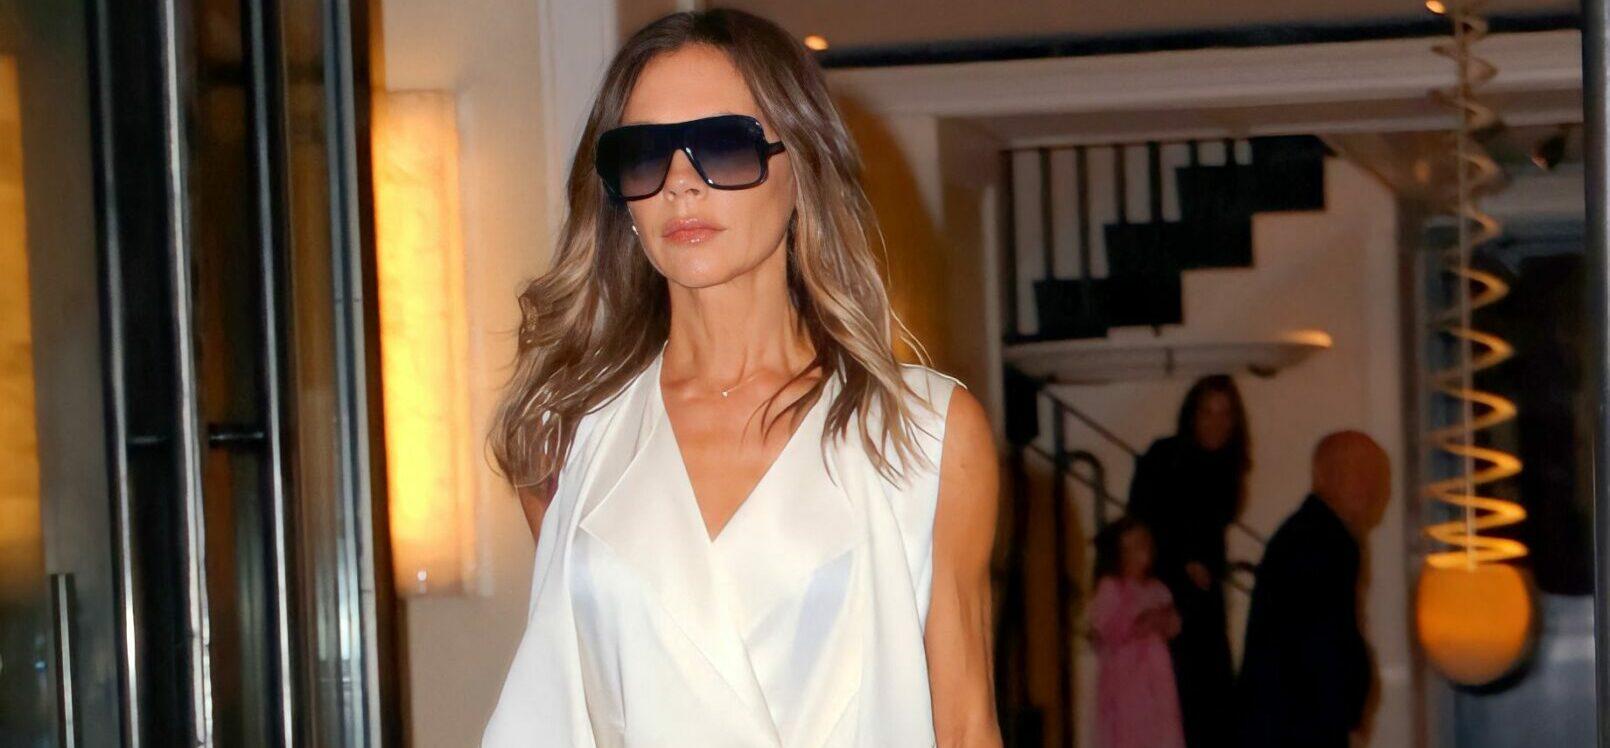 Victoria Beckham is seen leaving her hotel in NYC